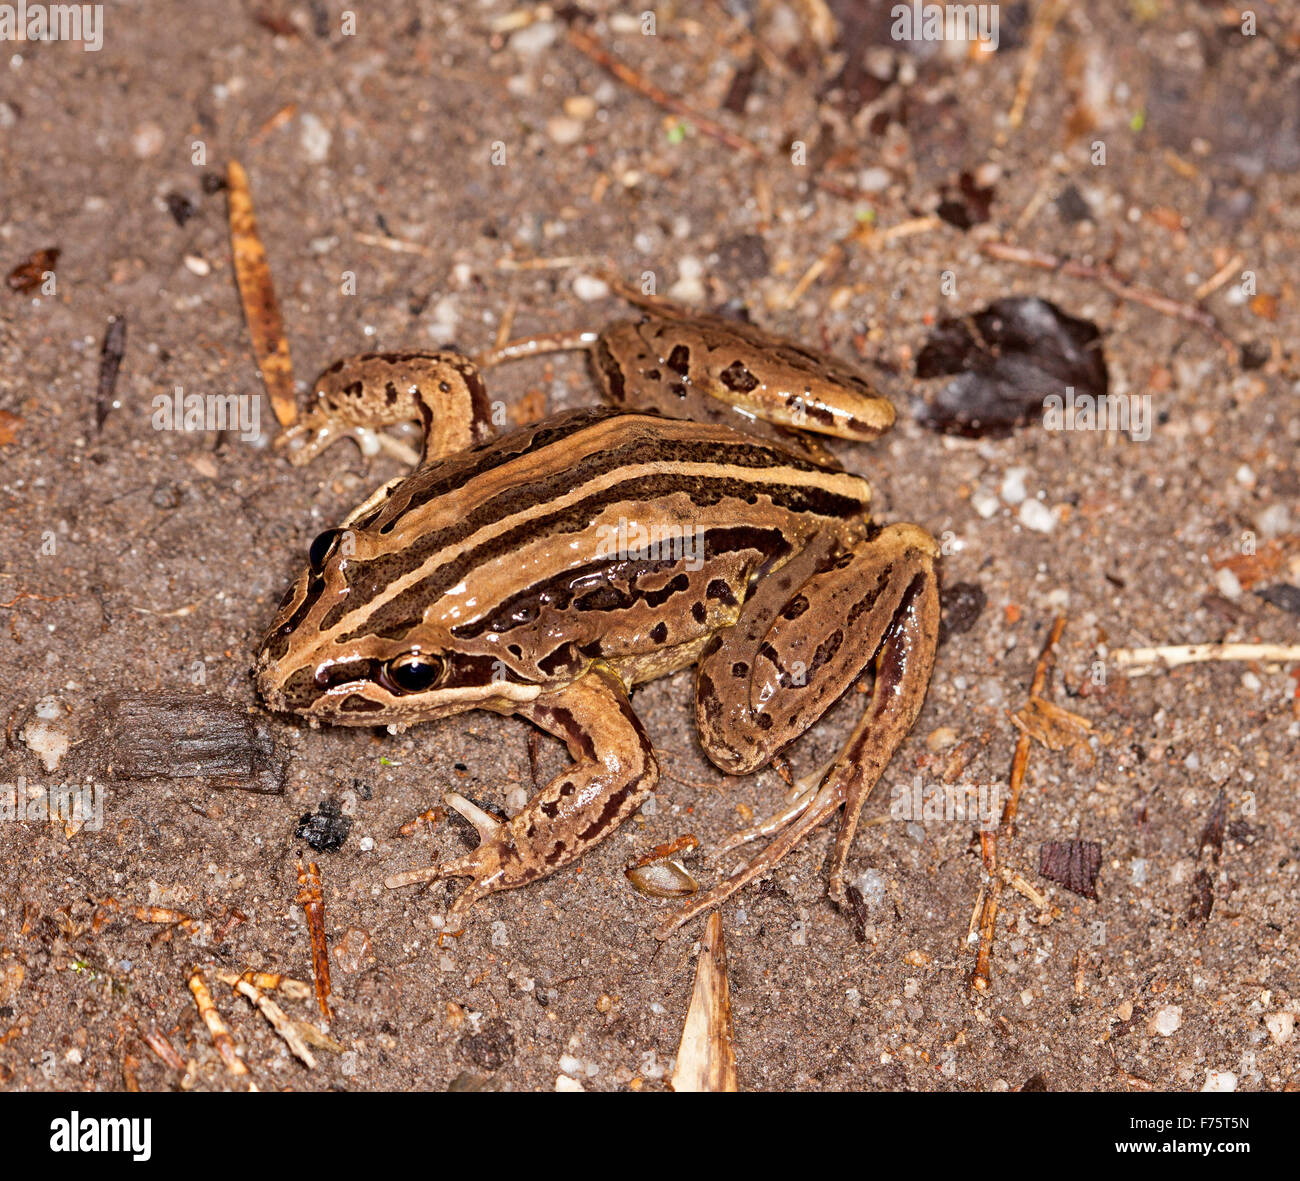 Australian brown striped marsh frog, Limnodynastes peronii, with eyes and large feet visible on ground near garden pond Stock Photo